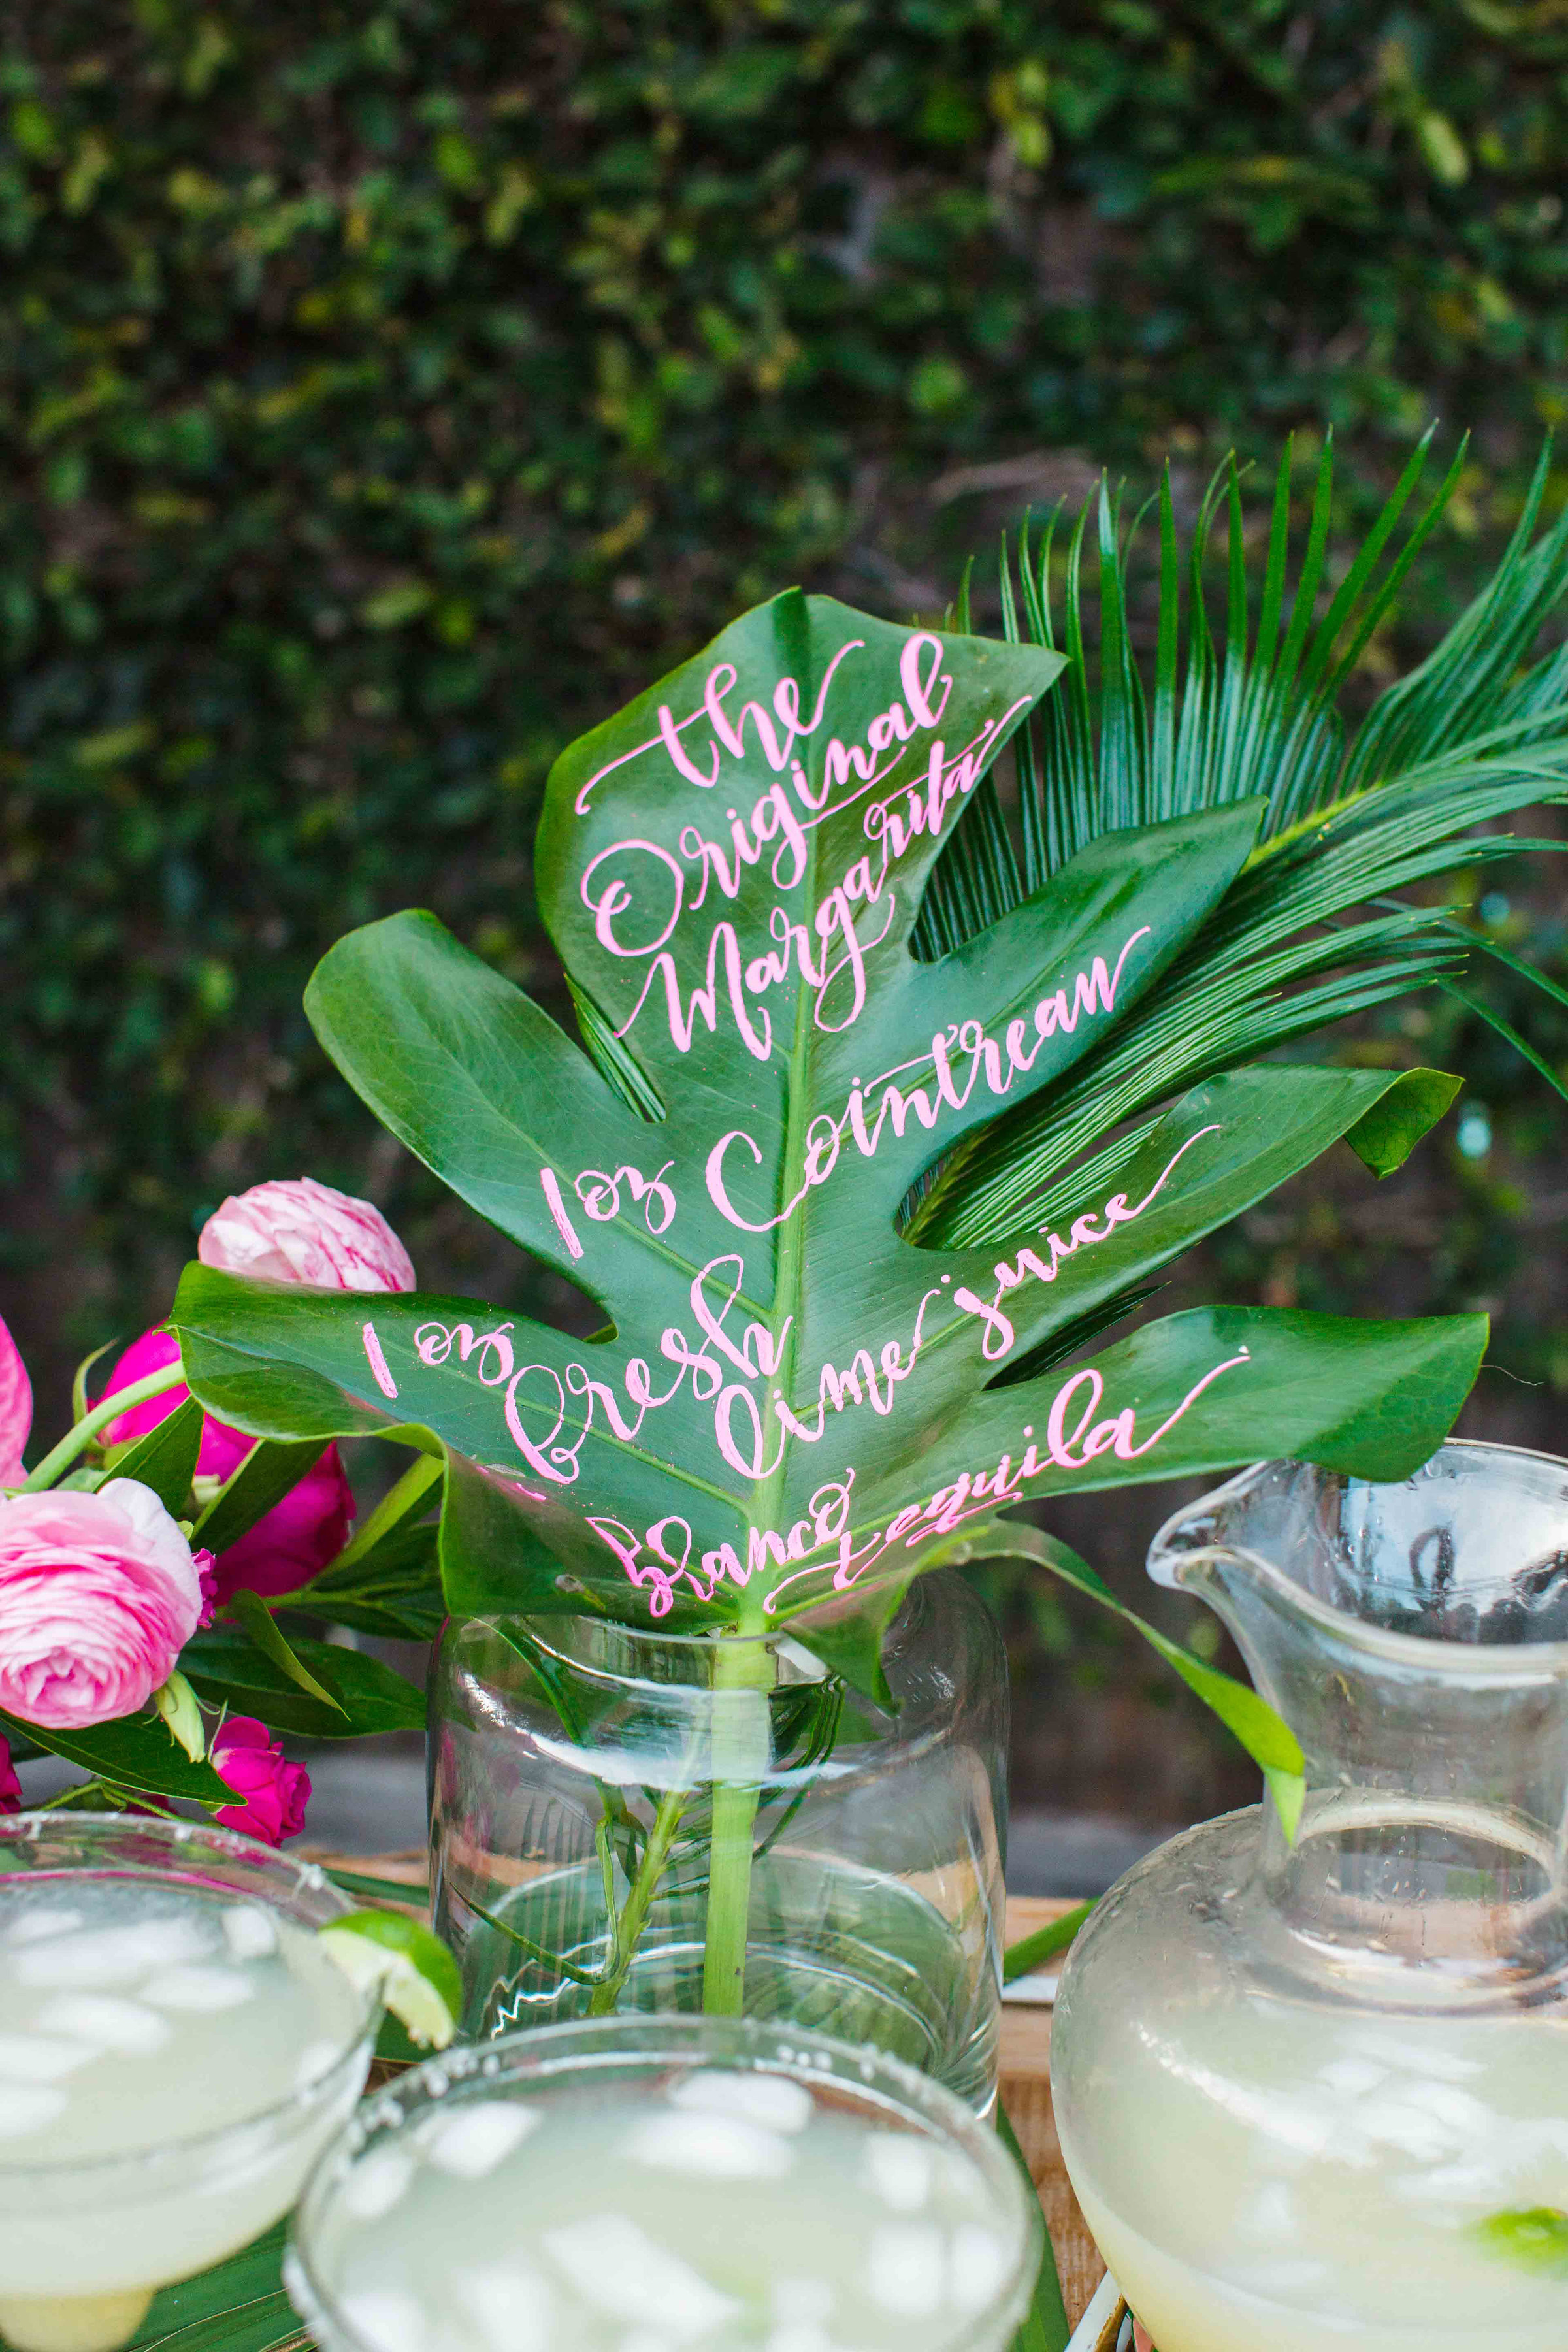 house-of-harper-summer-party-cointreau-calligraphy-by-natalie-gene-creative-florals-by-maxit-flower-design